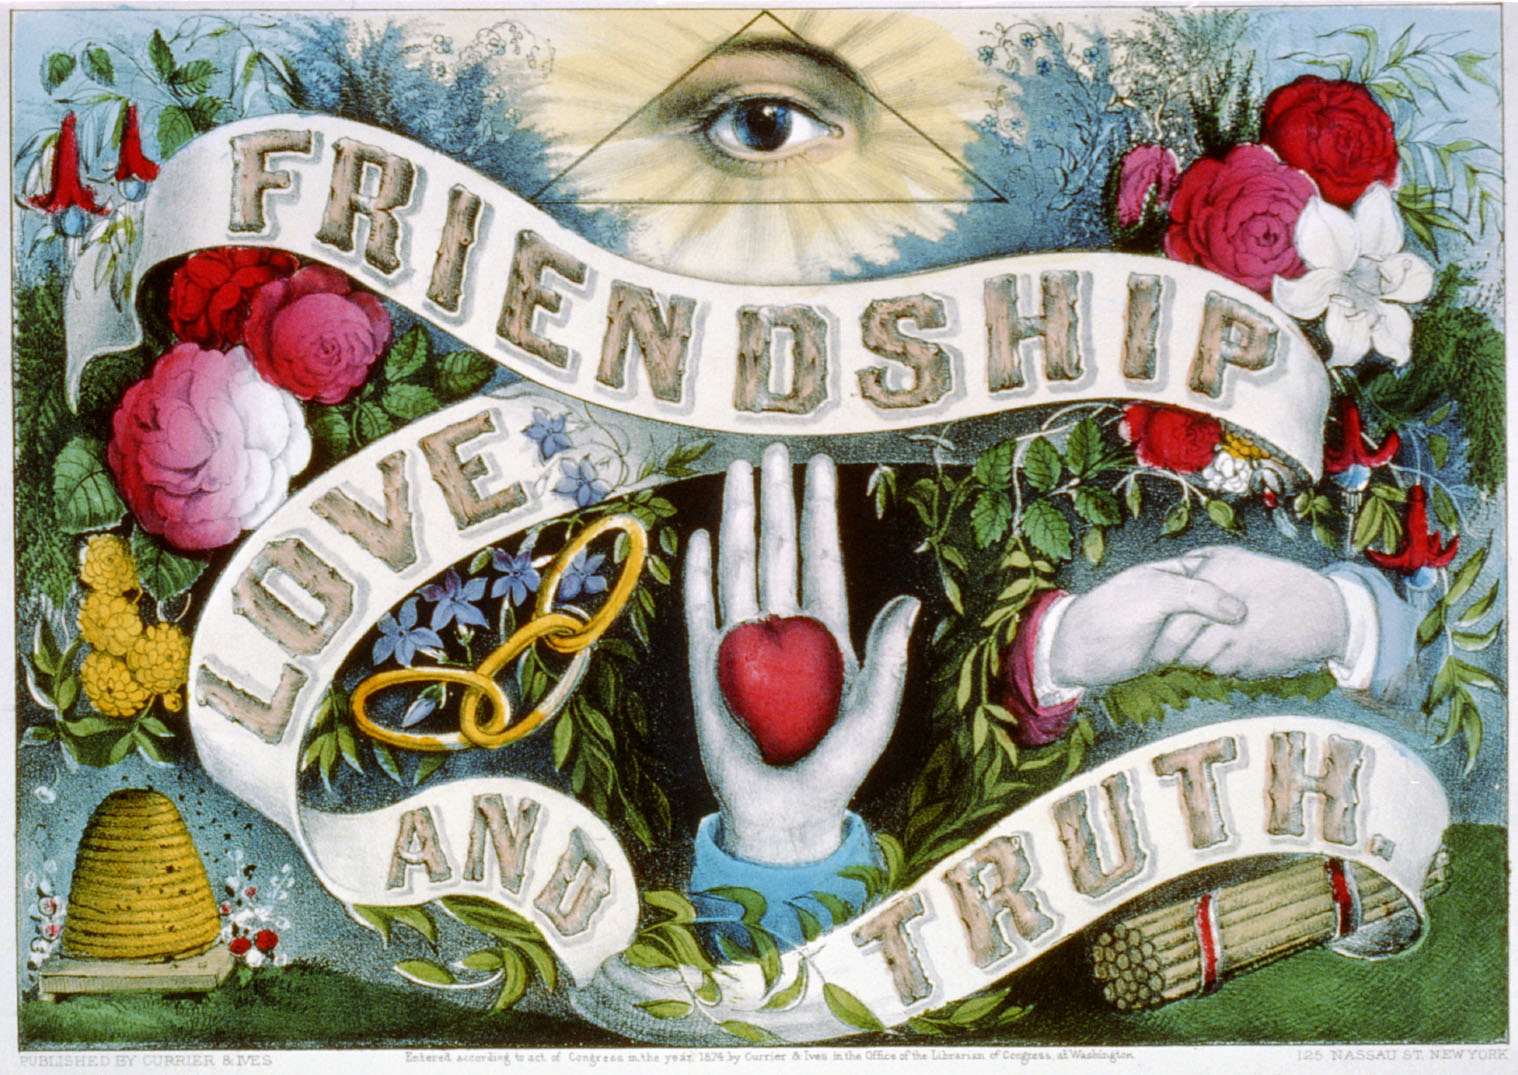 File:Friendship love and truth.jpg